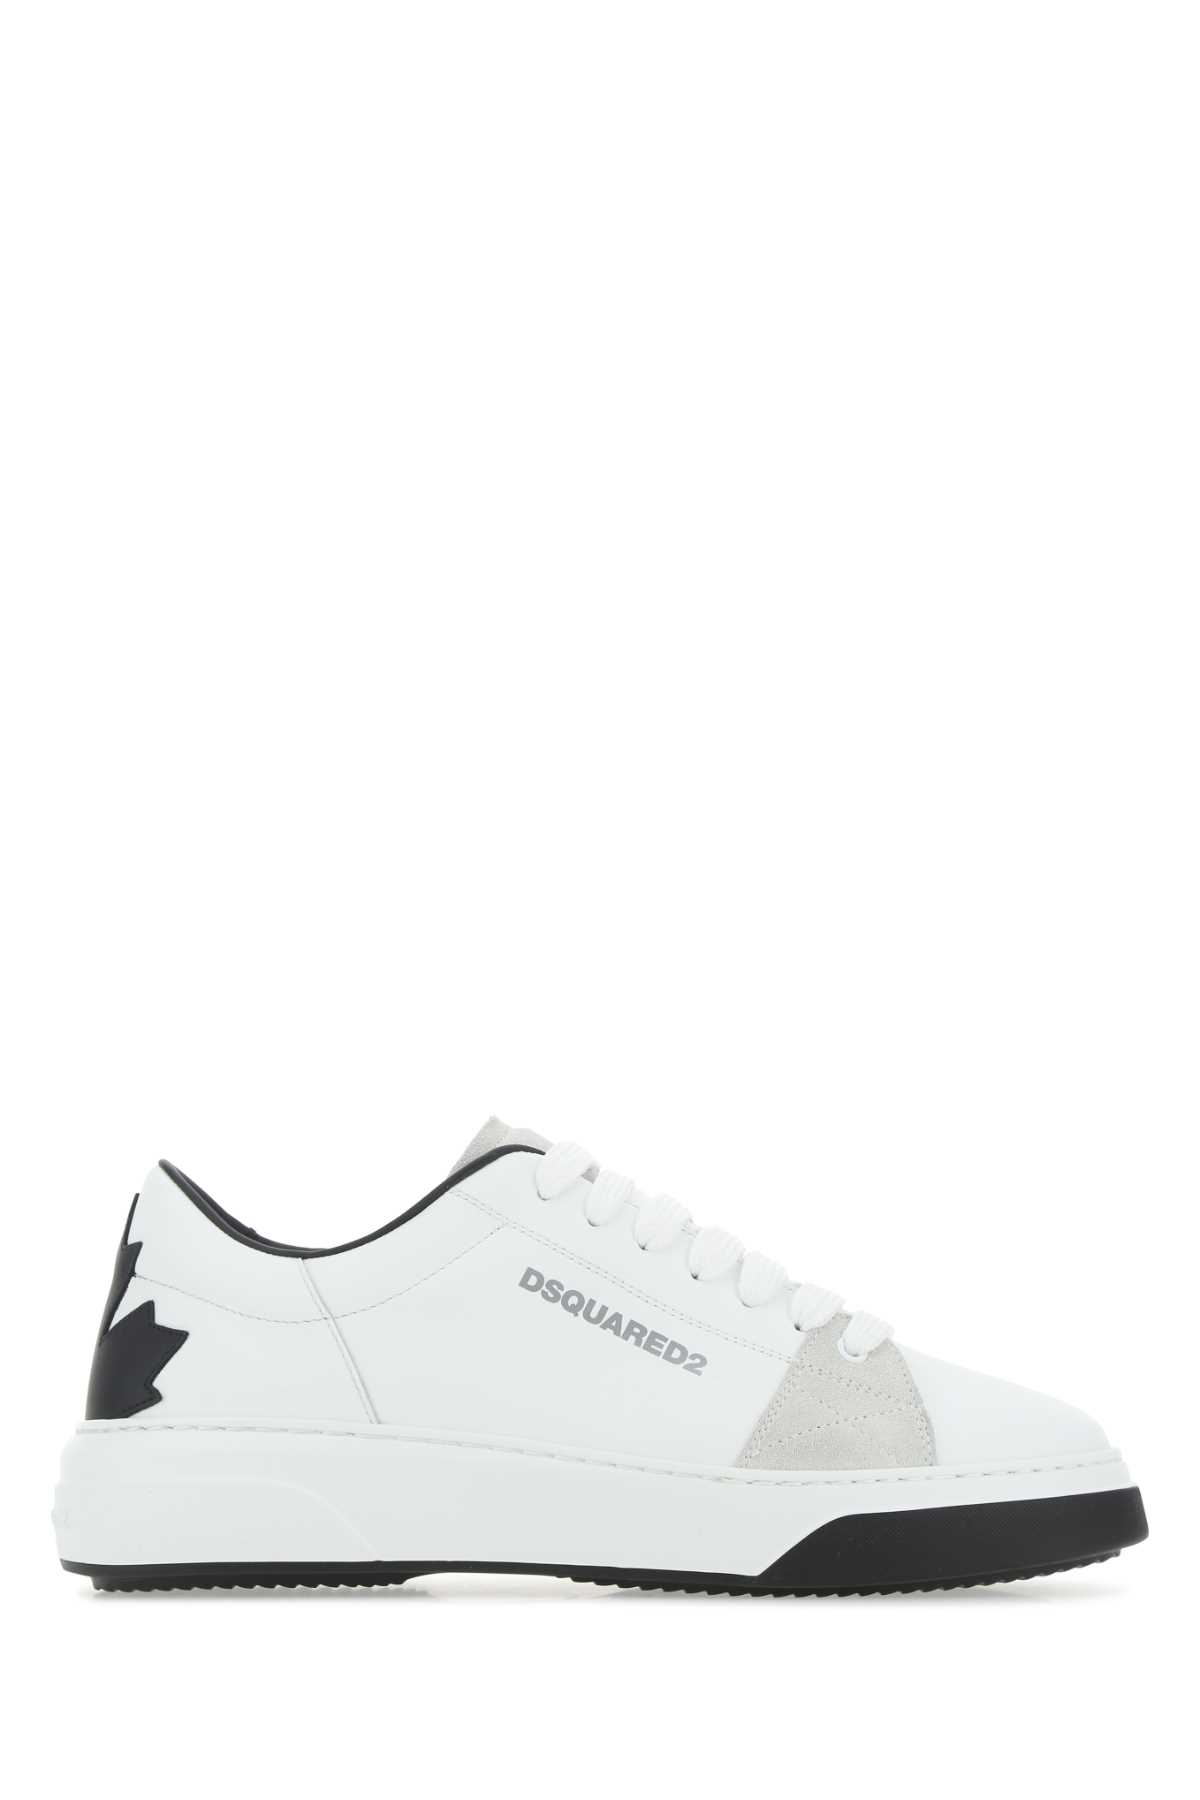 Dsquared2 Two-tone Leather Bumper Sneakers In M072